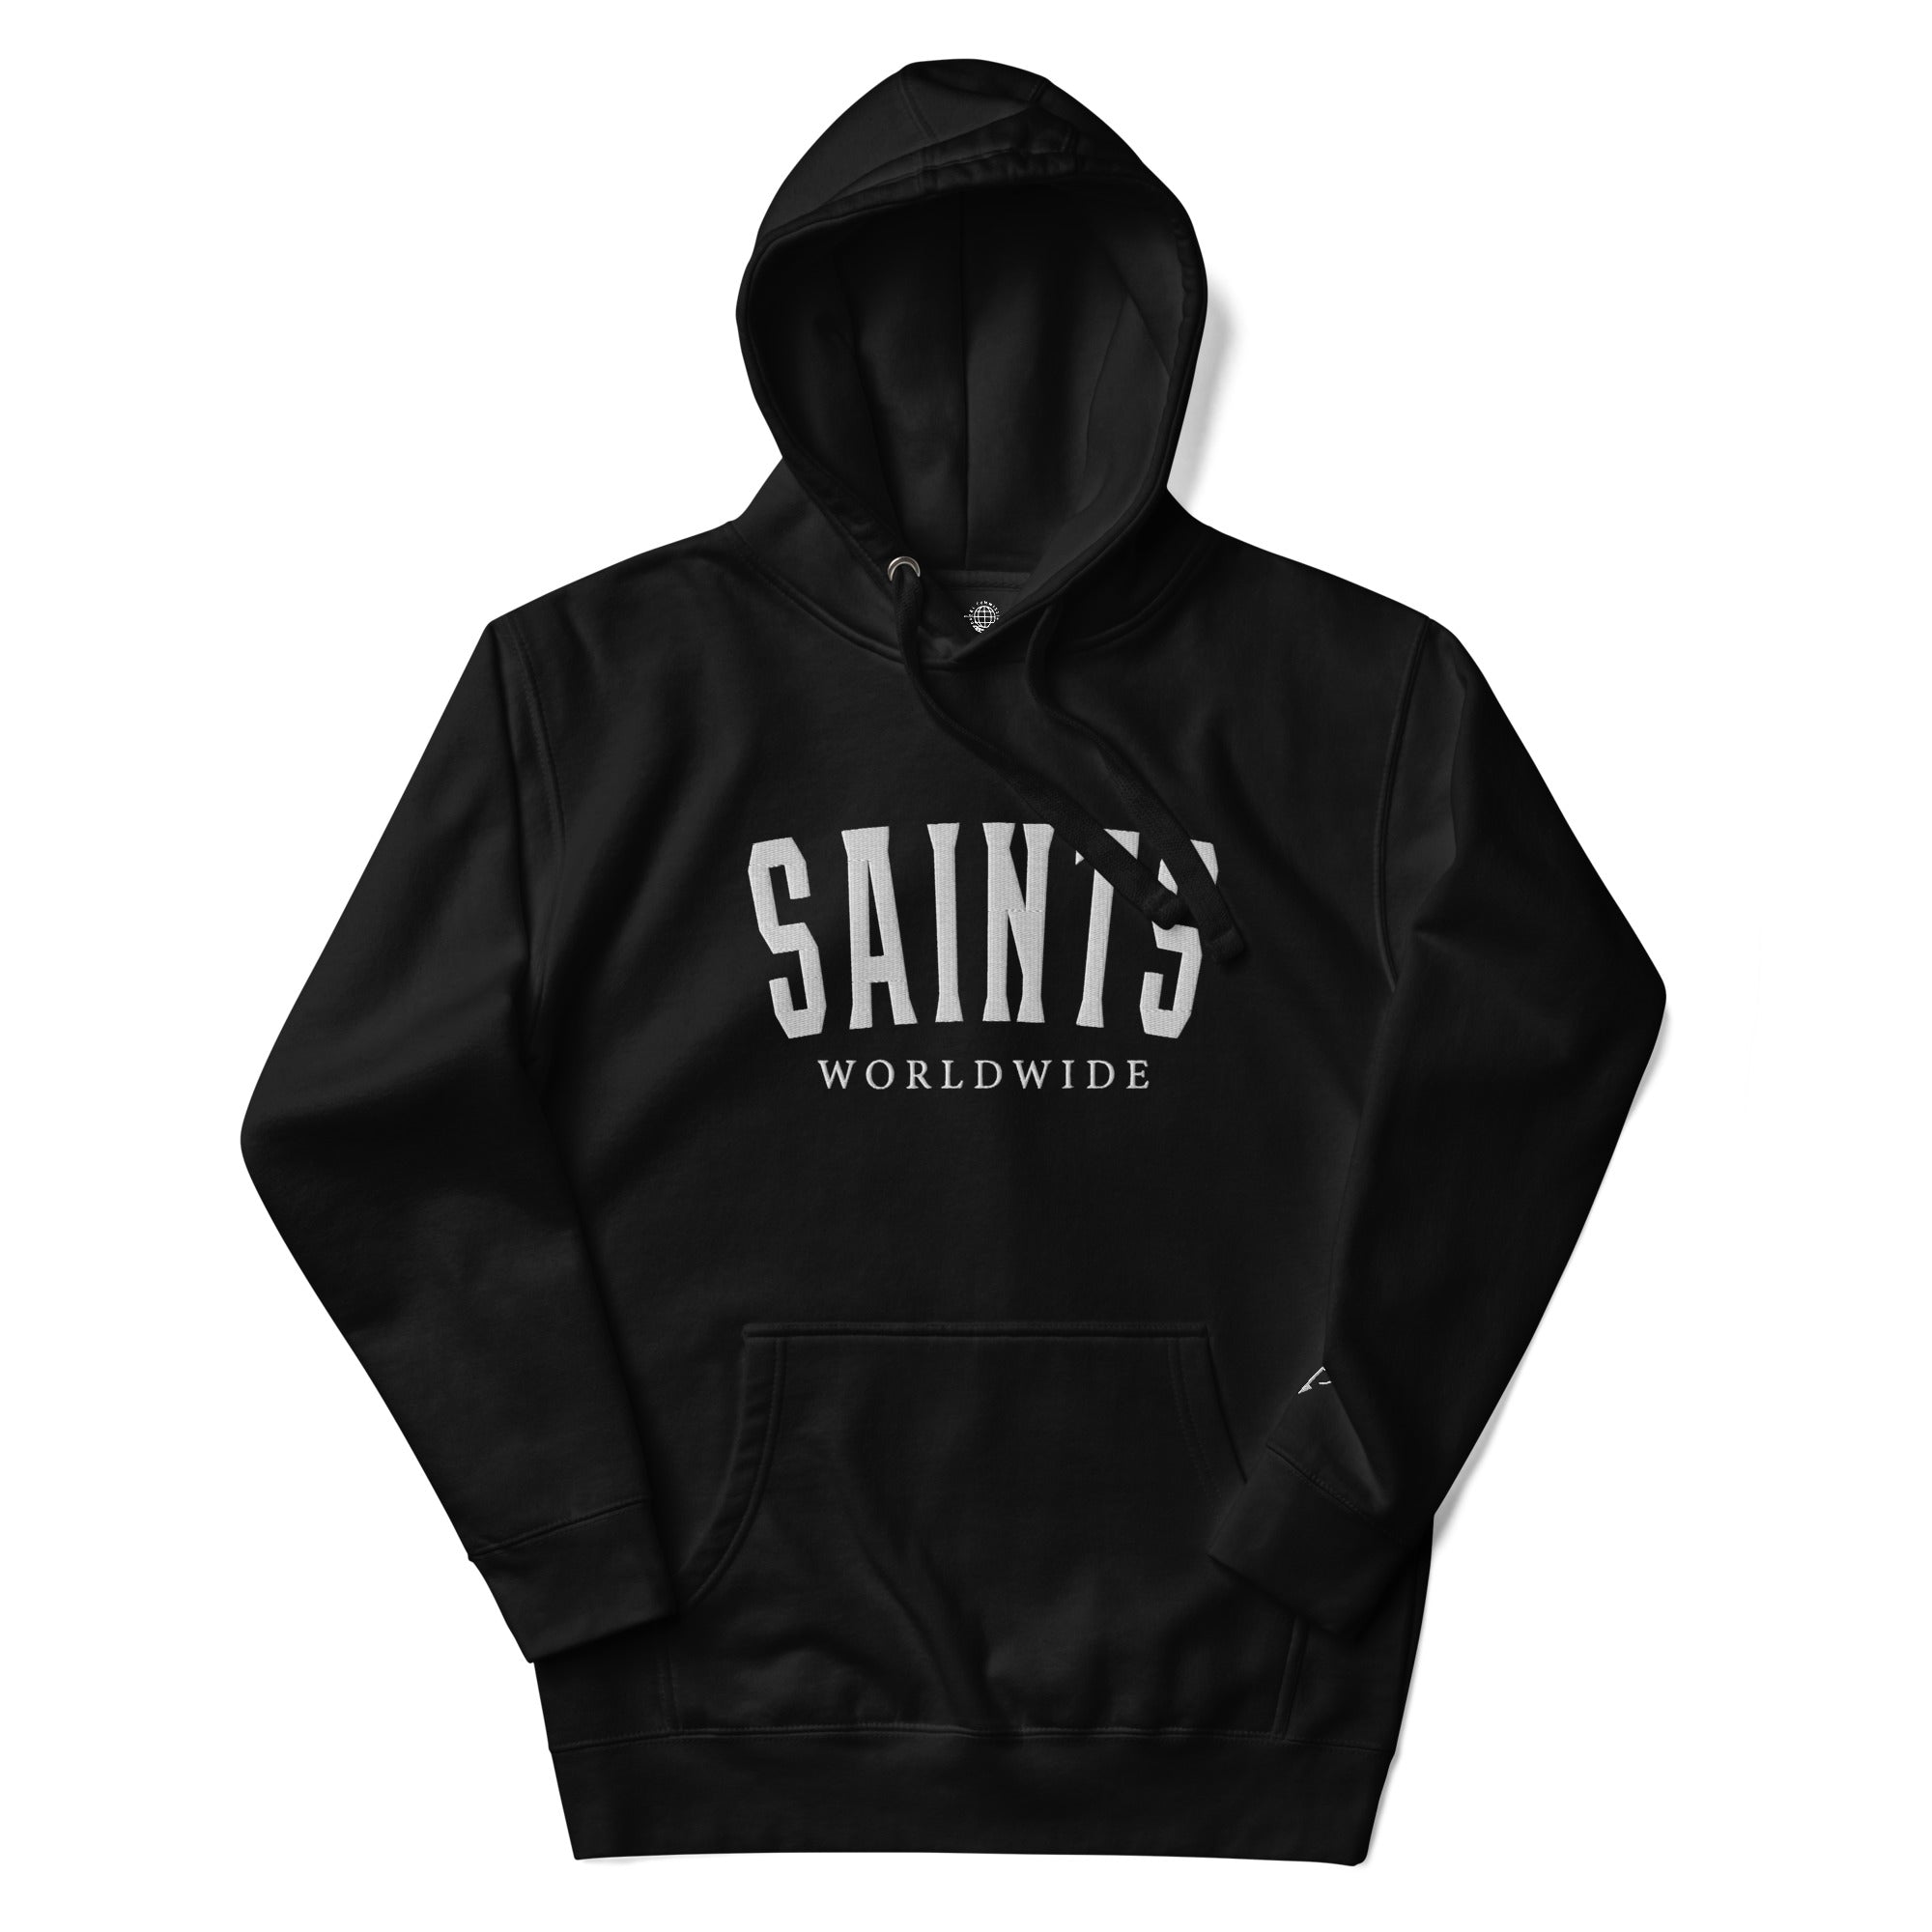 SAINTS WORLDWIDE Embroidered Hoodie Front